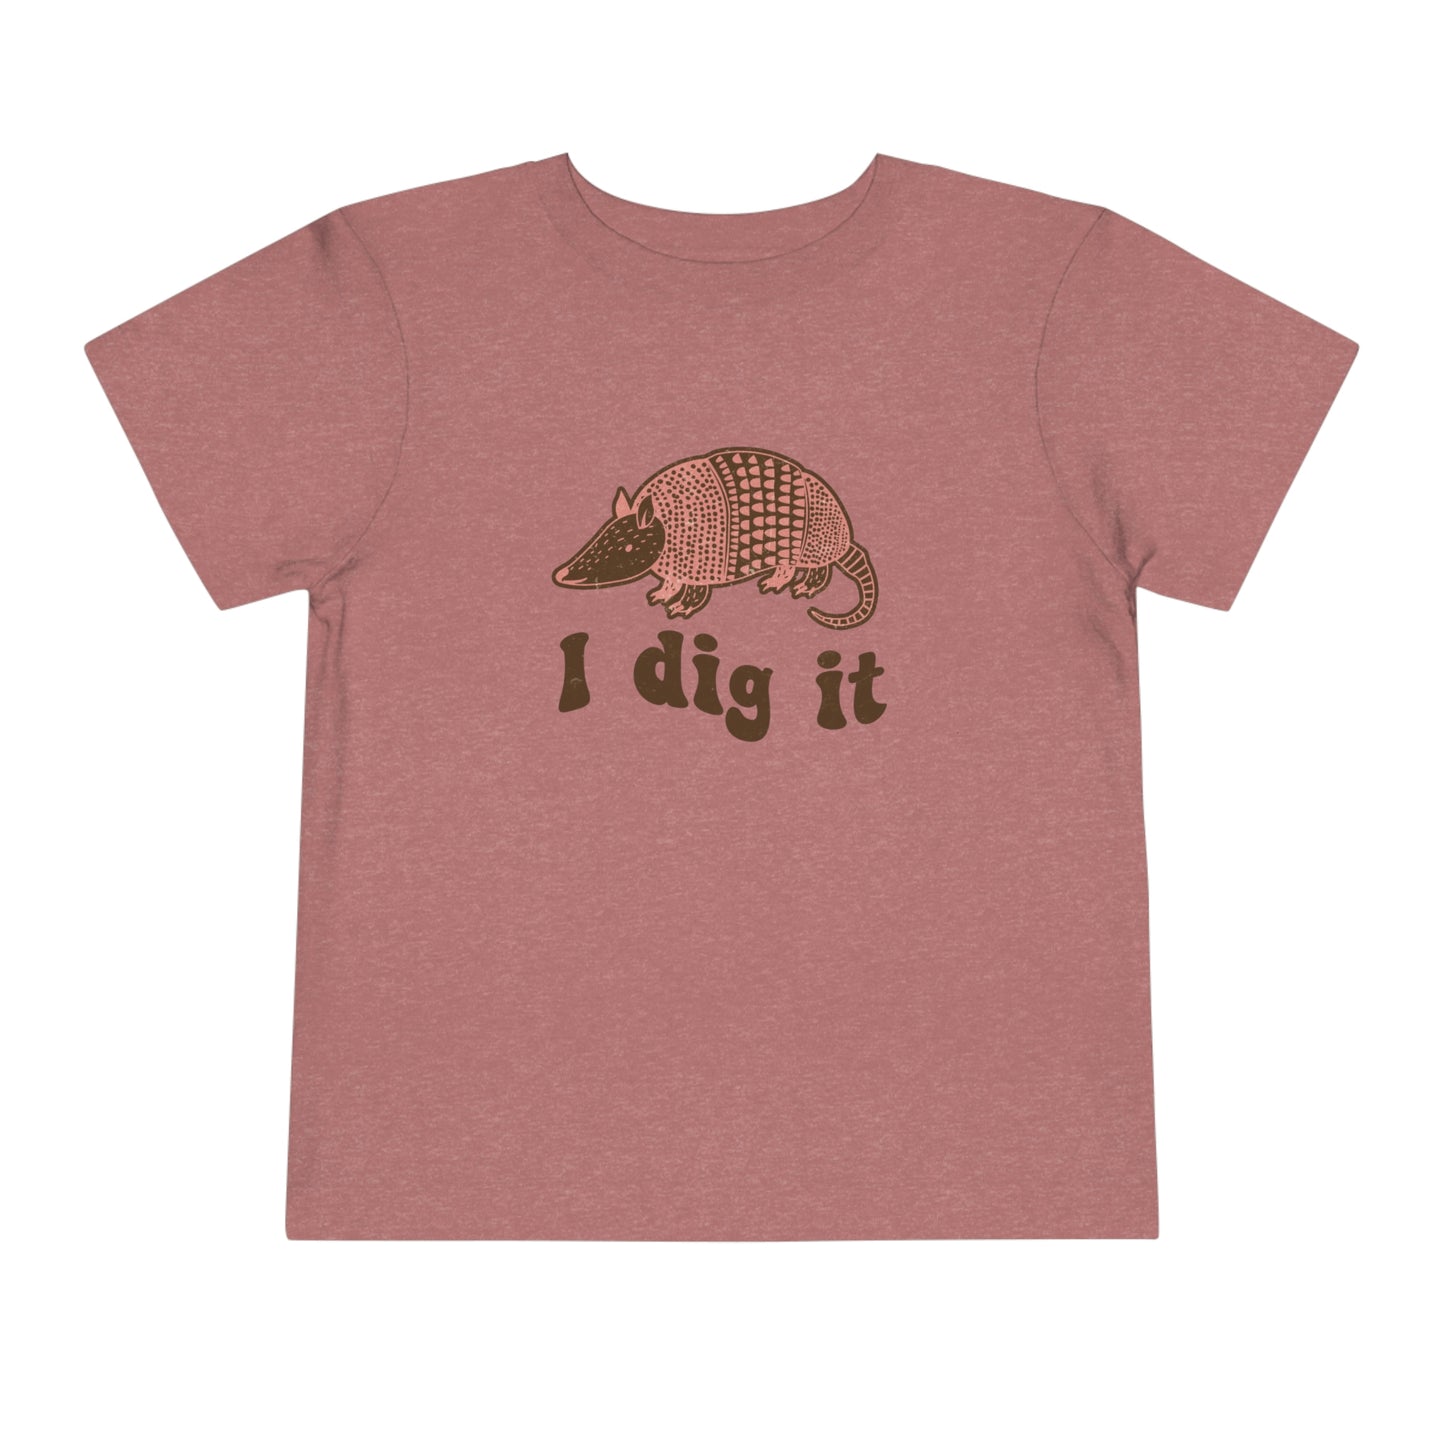 "I Dig It" Toddler Short Sleeve Tee (2T-5T)